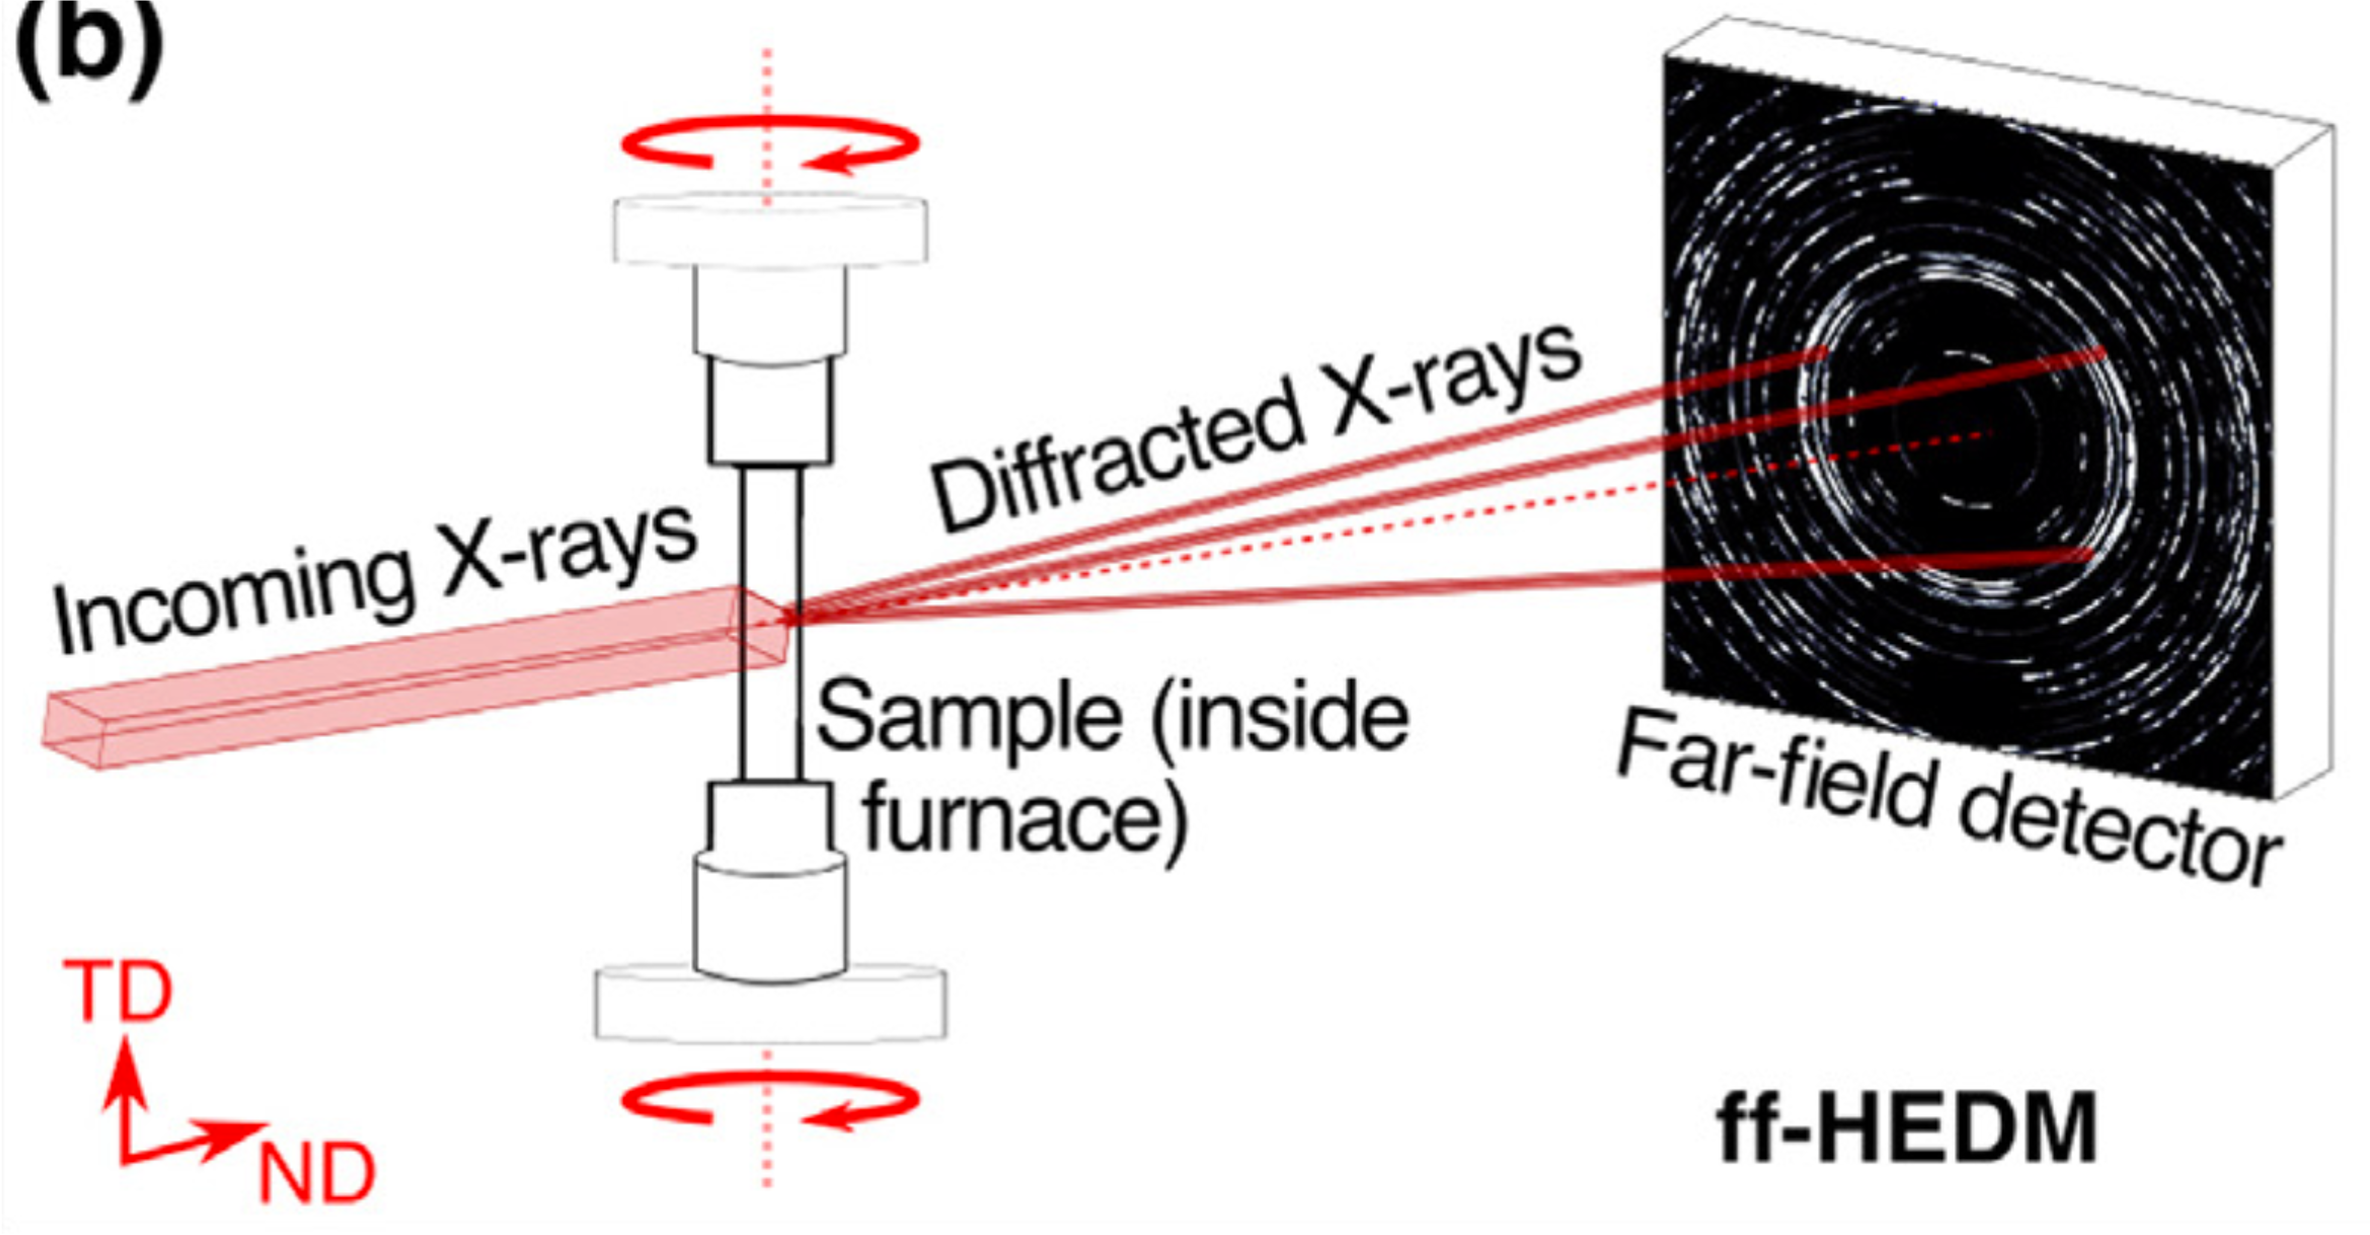 an image showing the experimental setup